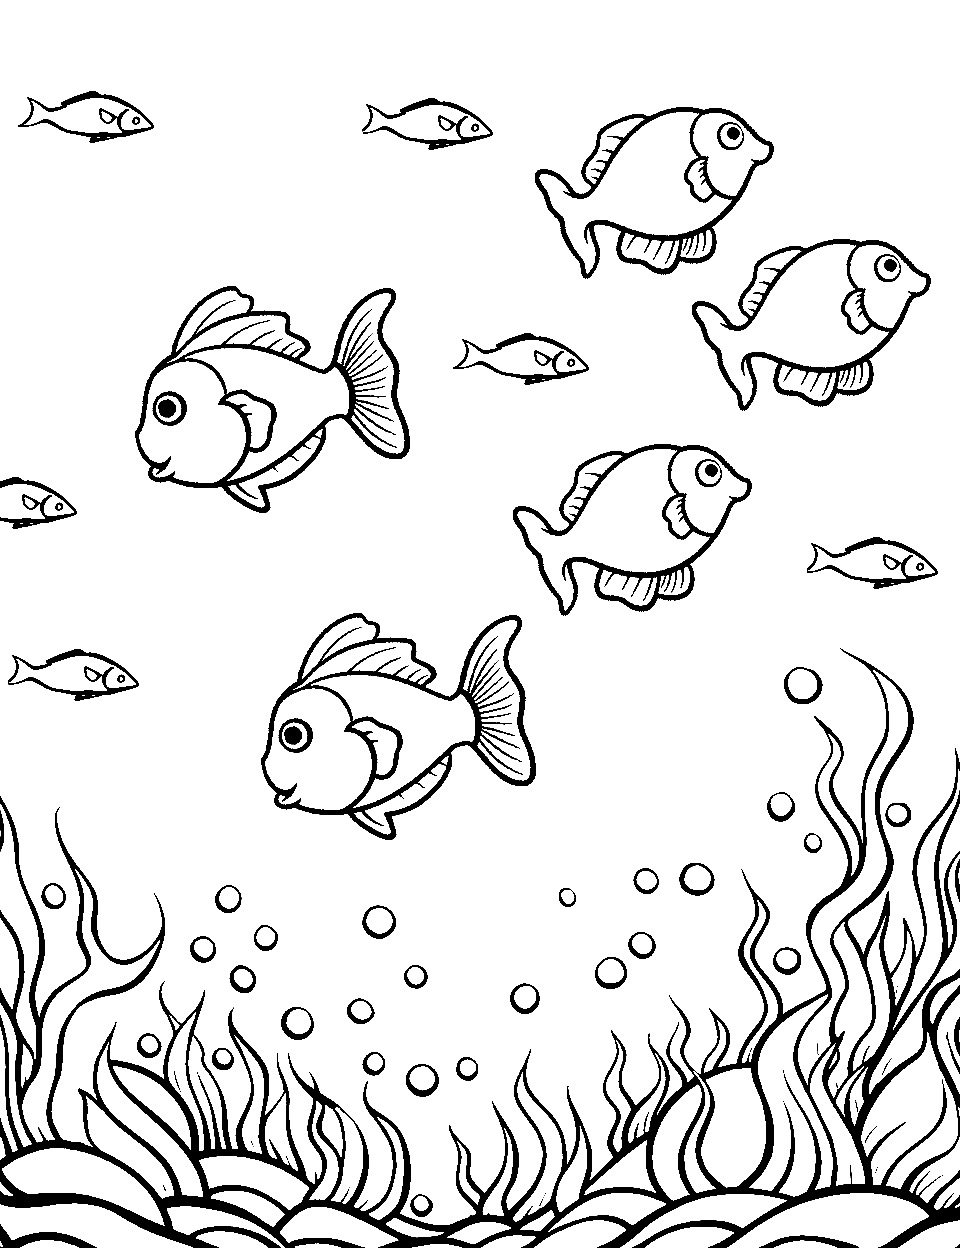 Coral Reef Exploration Ocean Coloring Page - A vibrant coral reef teeming with various types of corals and small fish.